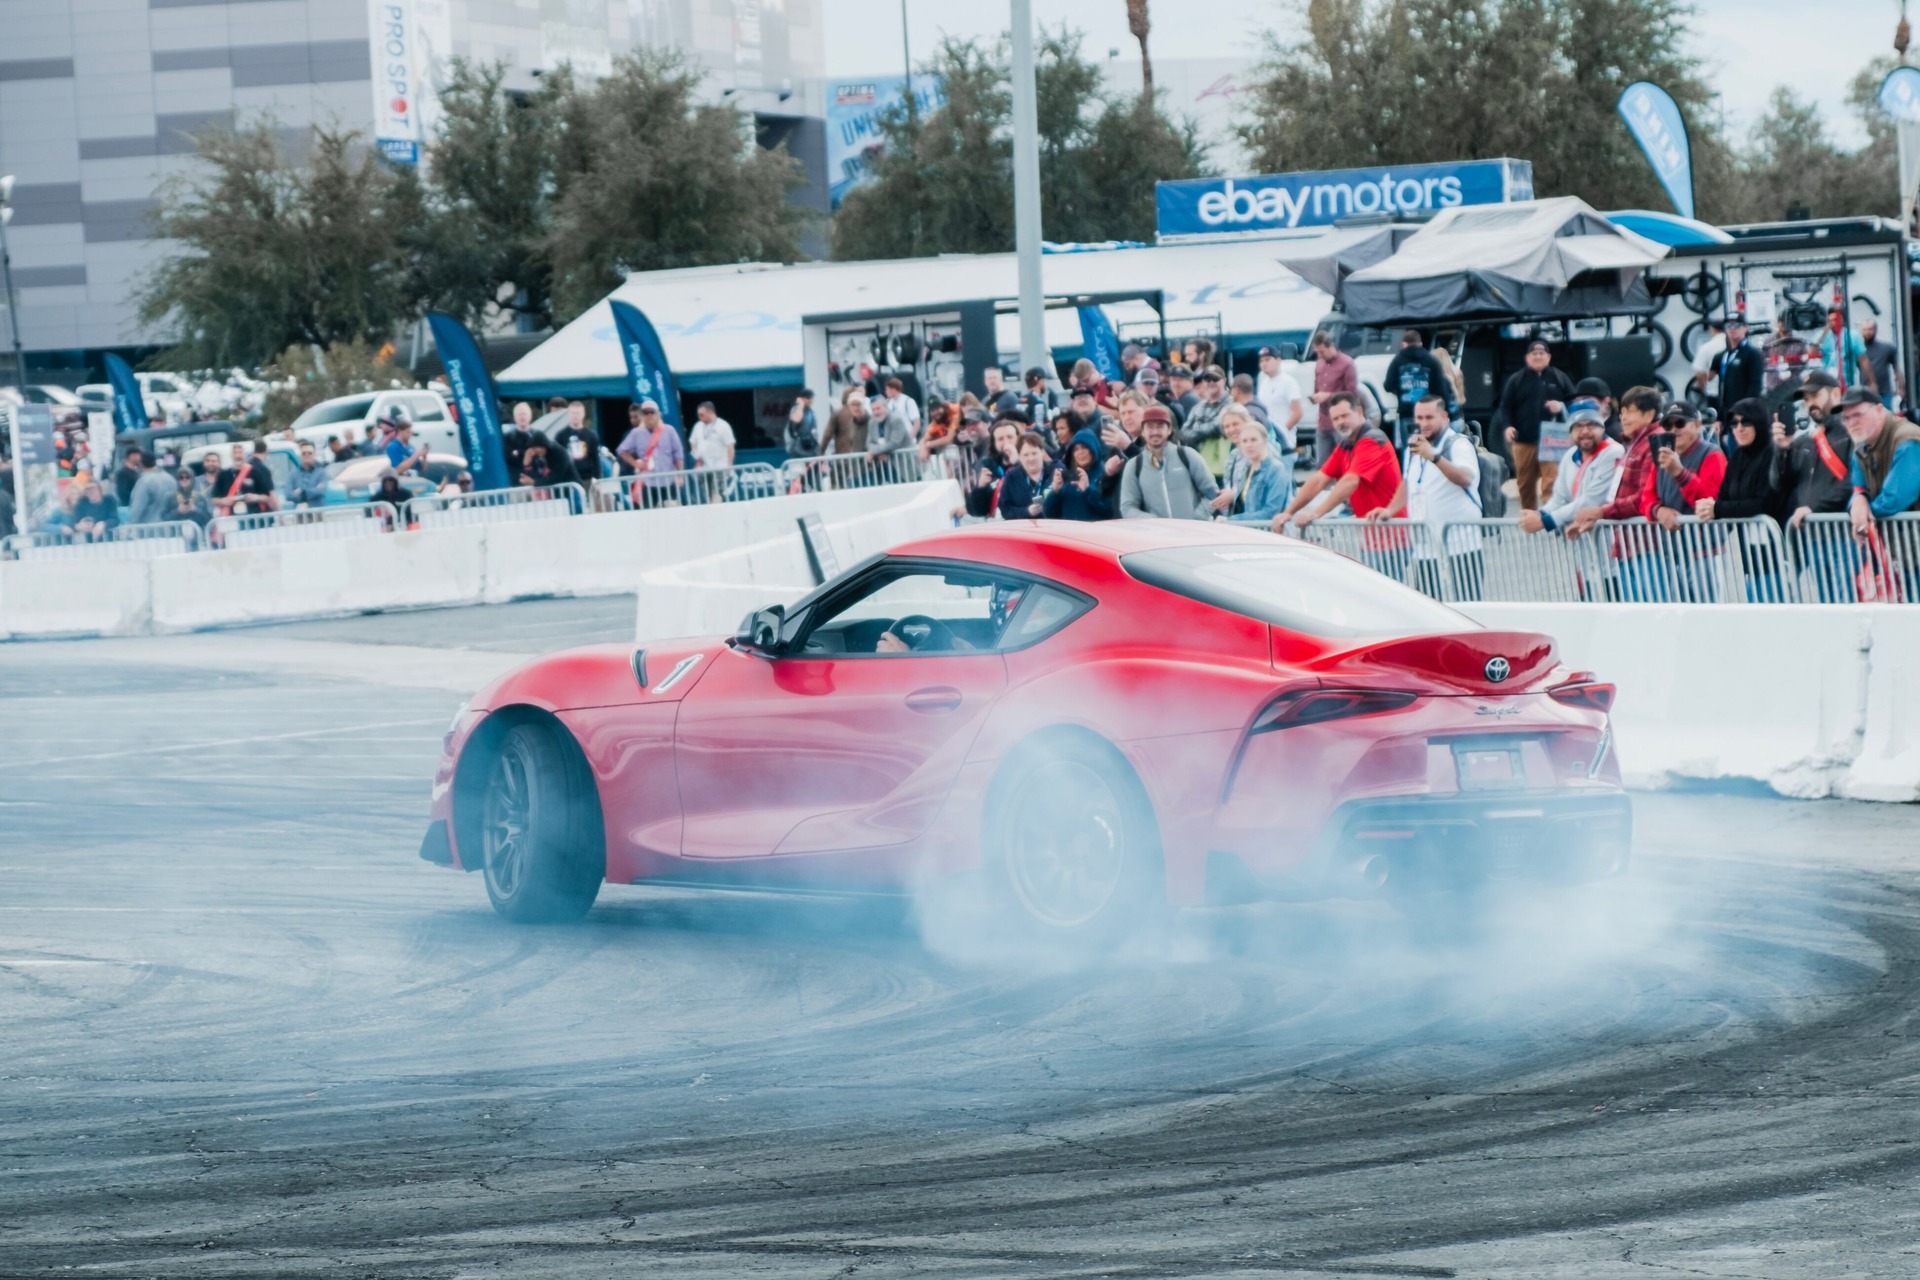 Supra drifting in the Burnout section at SEMA car show